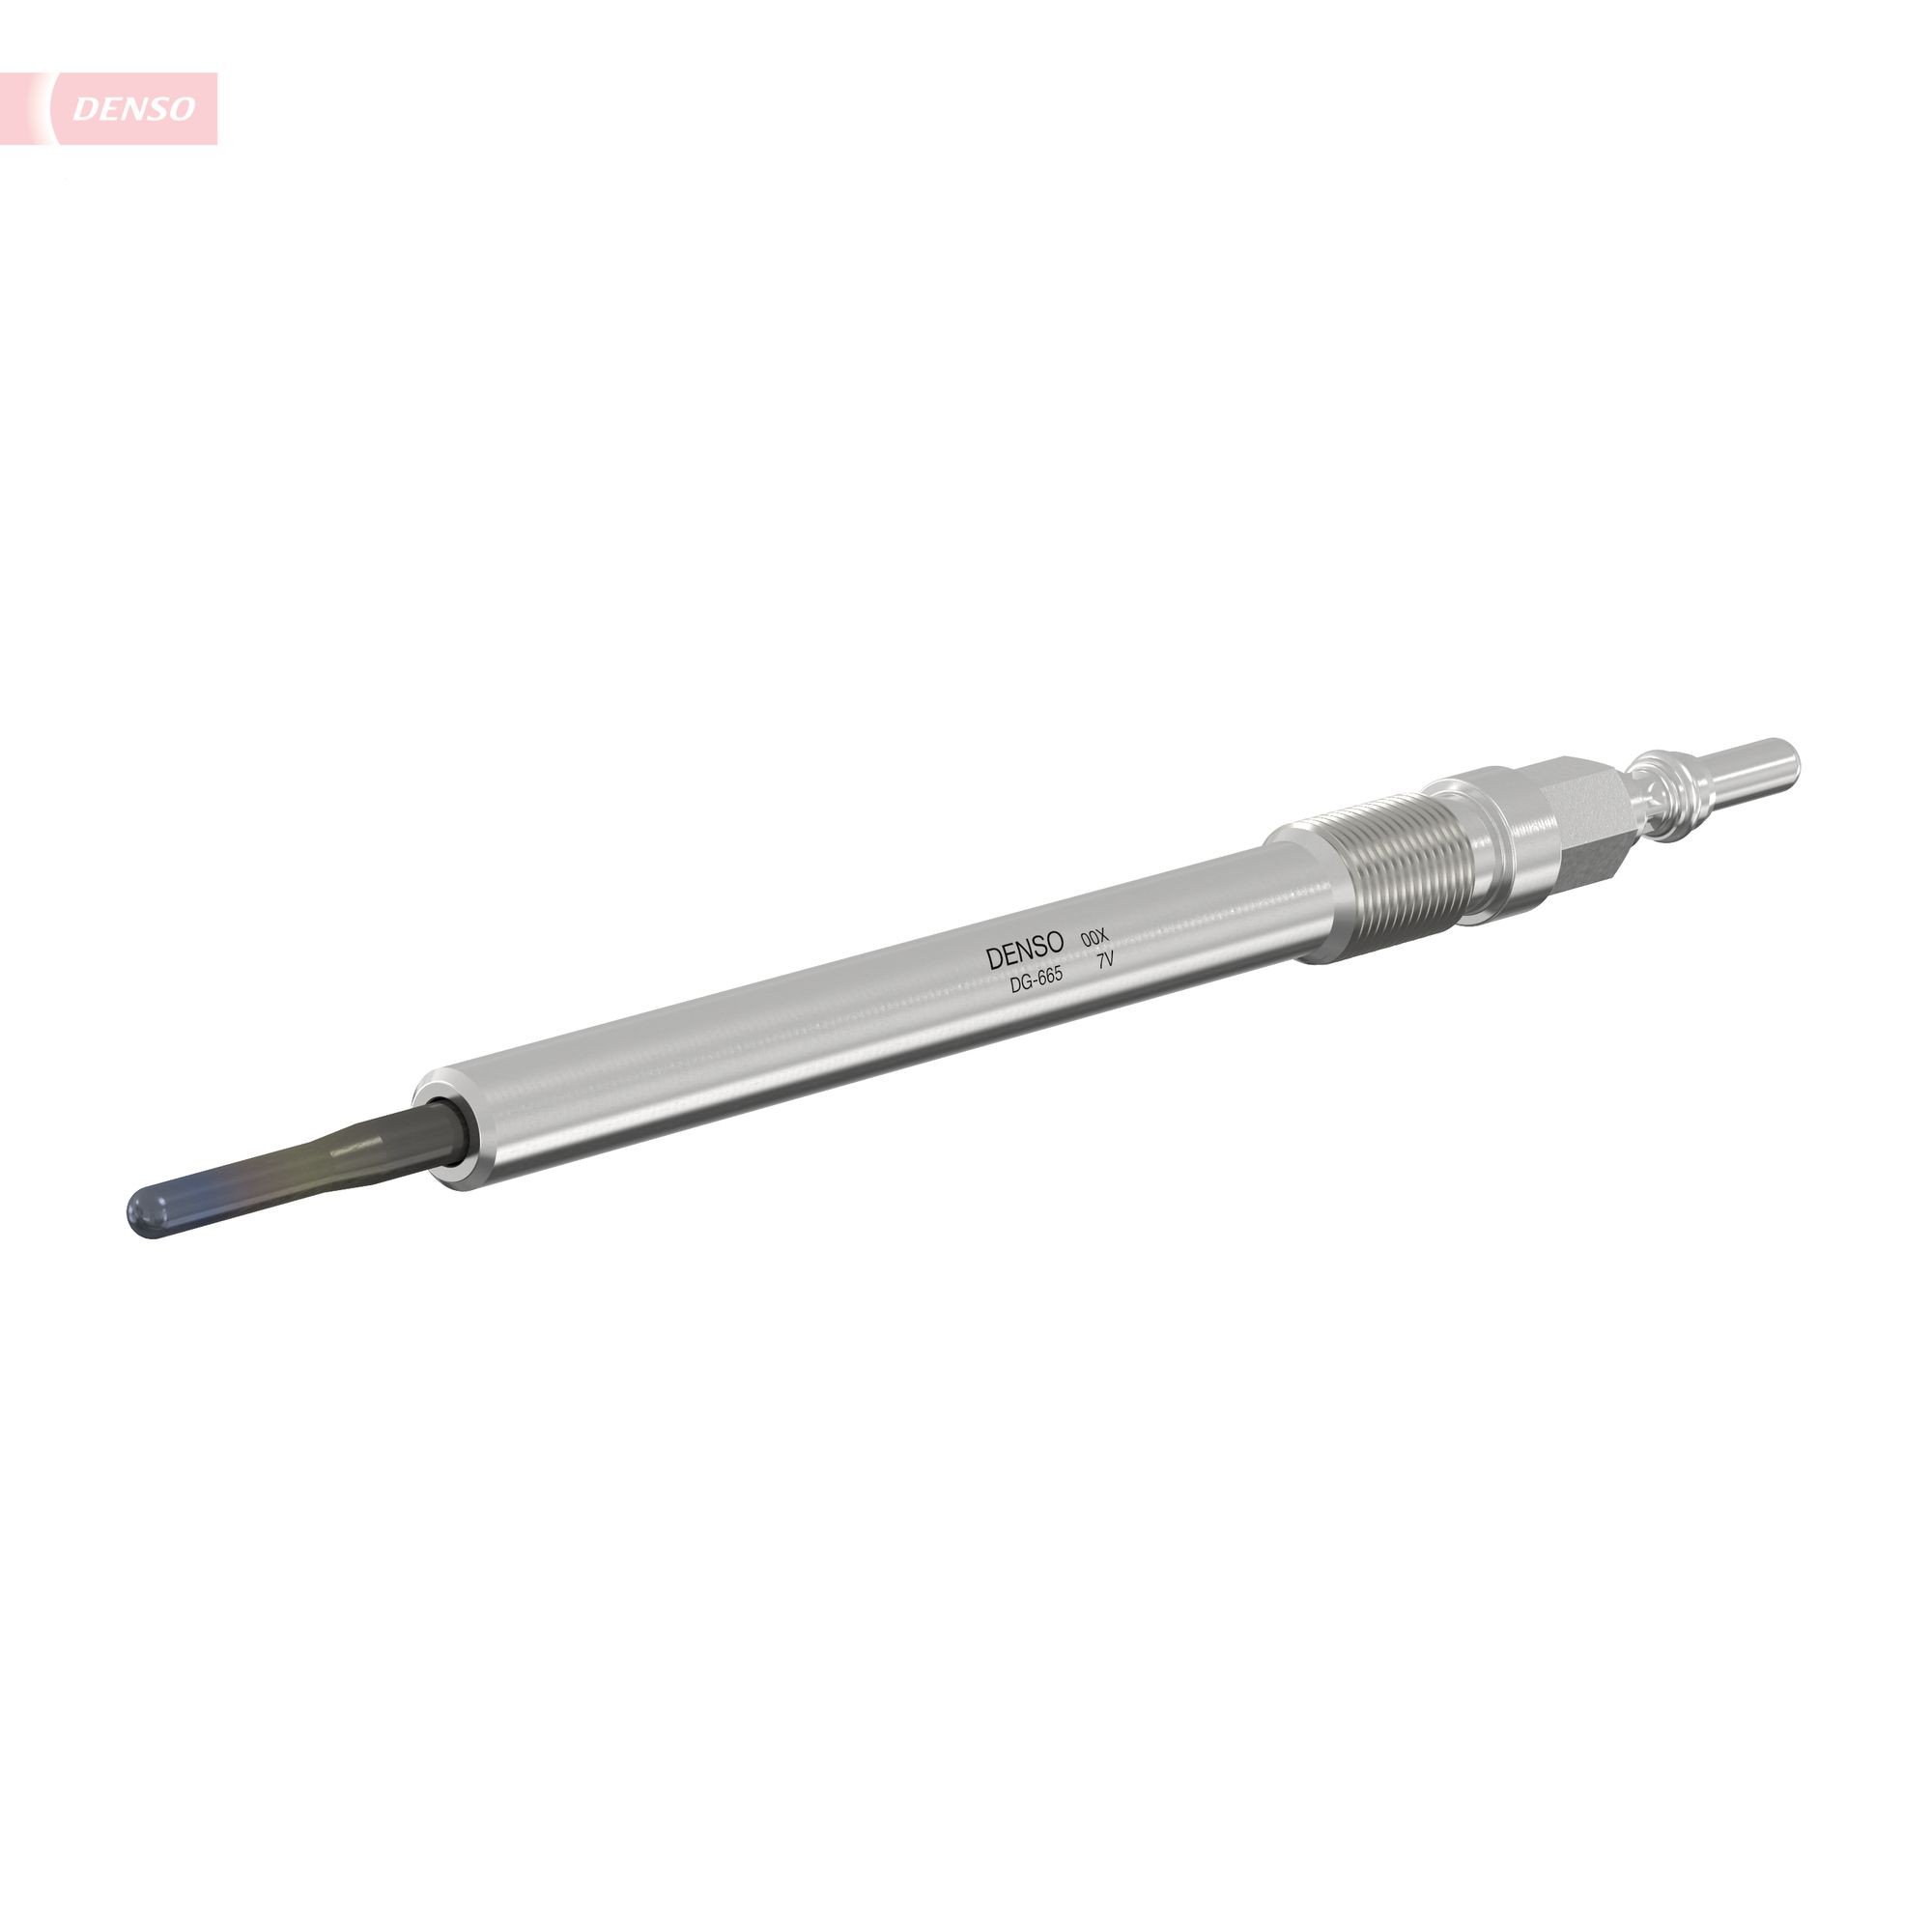 DENSO DG-665 Glow plug MERCEDES-BENZ experience and price